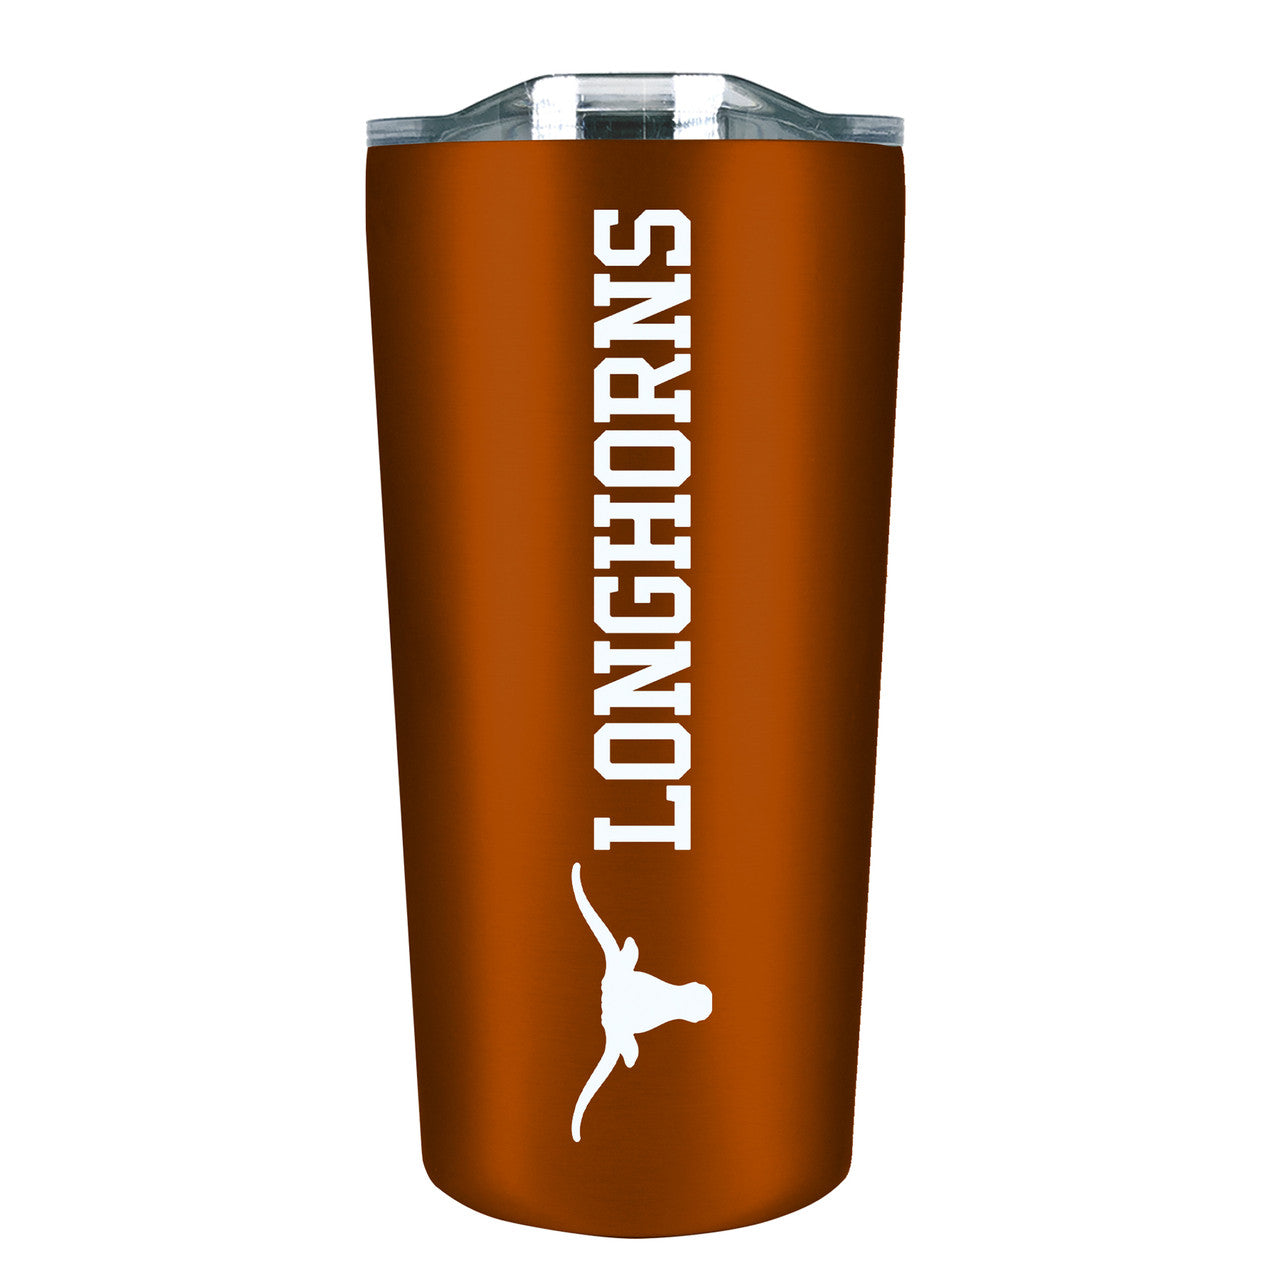 Officially Licensed Customizable Soft Touch Stainless Steel Double Walled Travel Tumbler-NCAA Team Travel Mug featured crisp graphics, sliding easy sip lid, and manageable size so it's cup holder friendly! The soft touch frosted coating and sliding lid closure will help make this tumbler part of your everyday routine.  Double walled, this will keep your beverage hot OR cold for hours, and will not sweat in the heat. Perfect for the gym or locker room. BPA and Lead Free. Hand Wash Recommended.